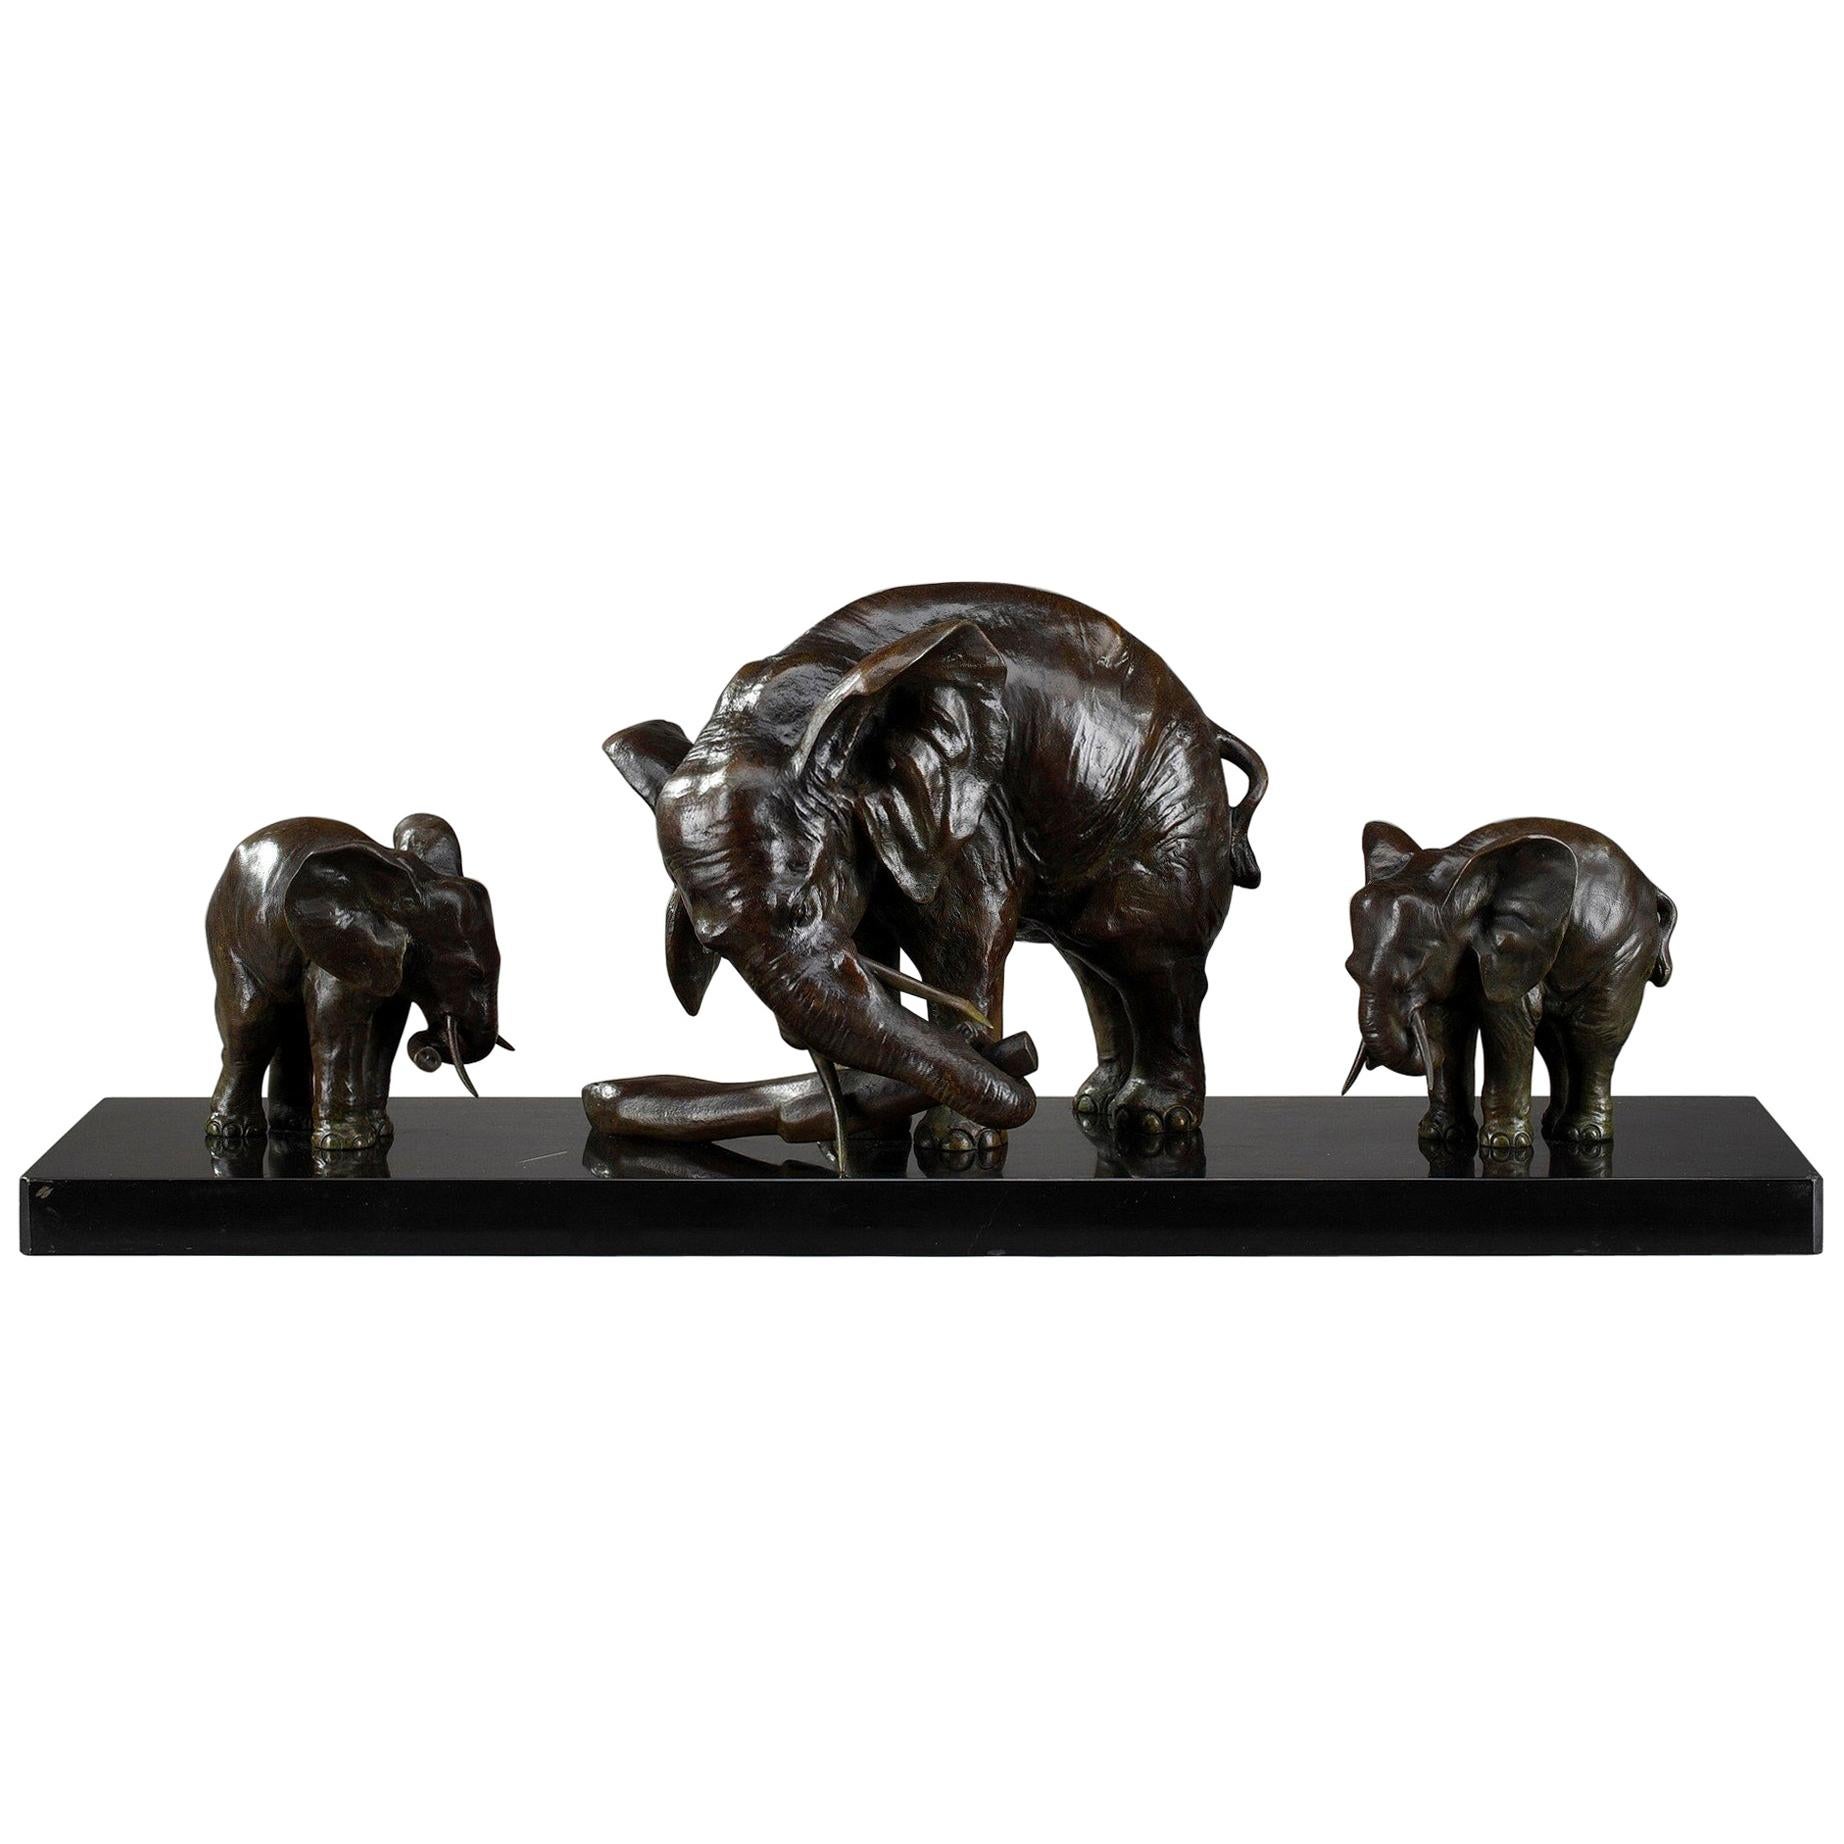 Art Deco Elephant with Its Two Baby Elephants by Ulisse Caputo